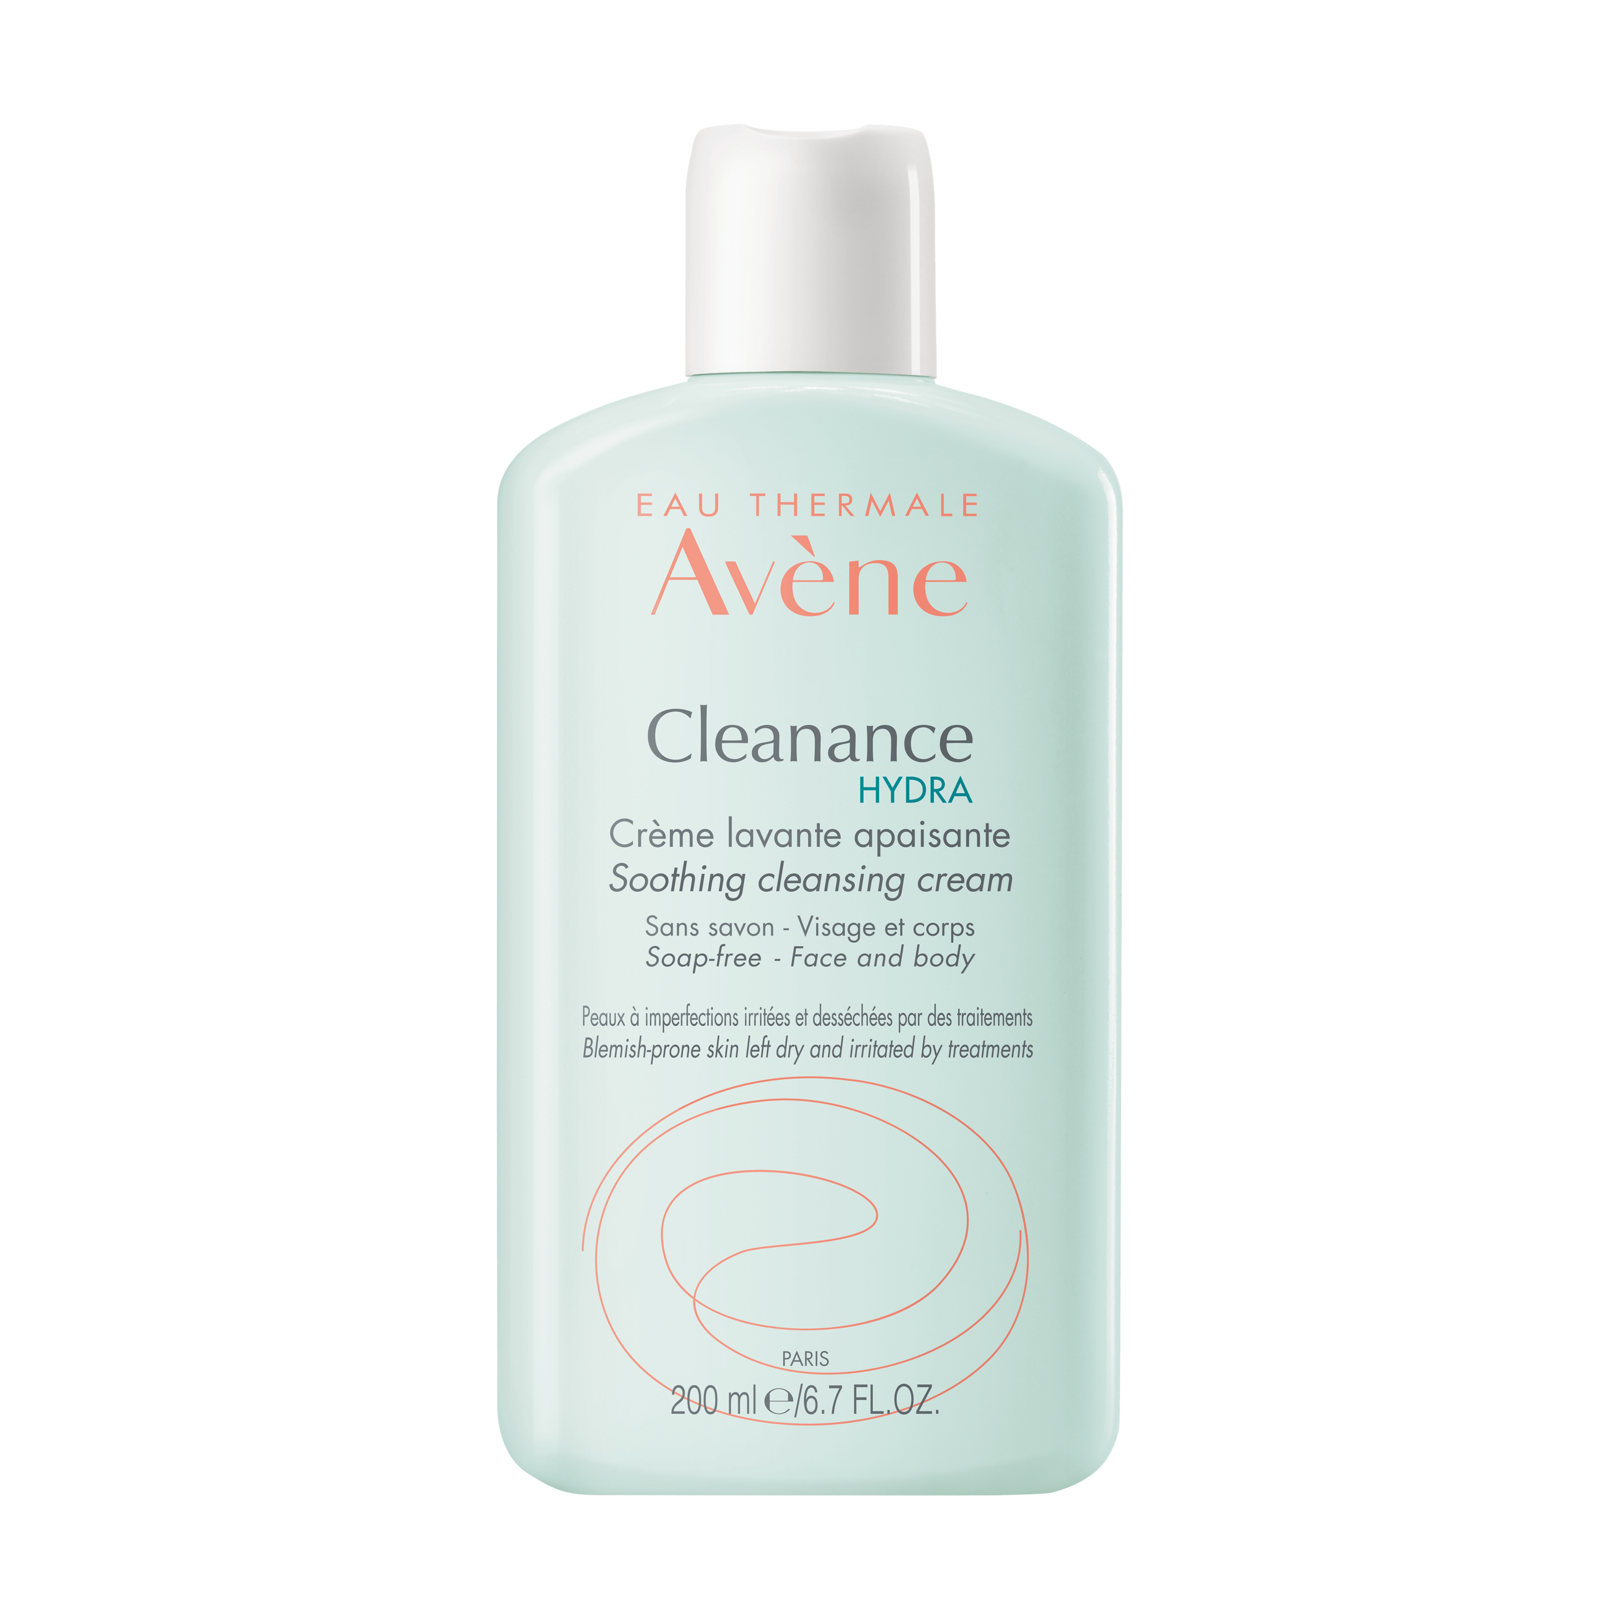 Cleanance HYDRA Soothing Cream, skin comfort I Eau Thermale Avène